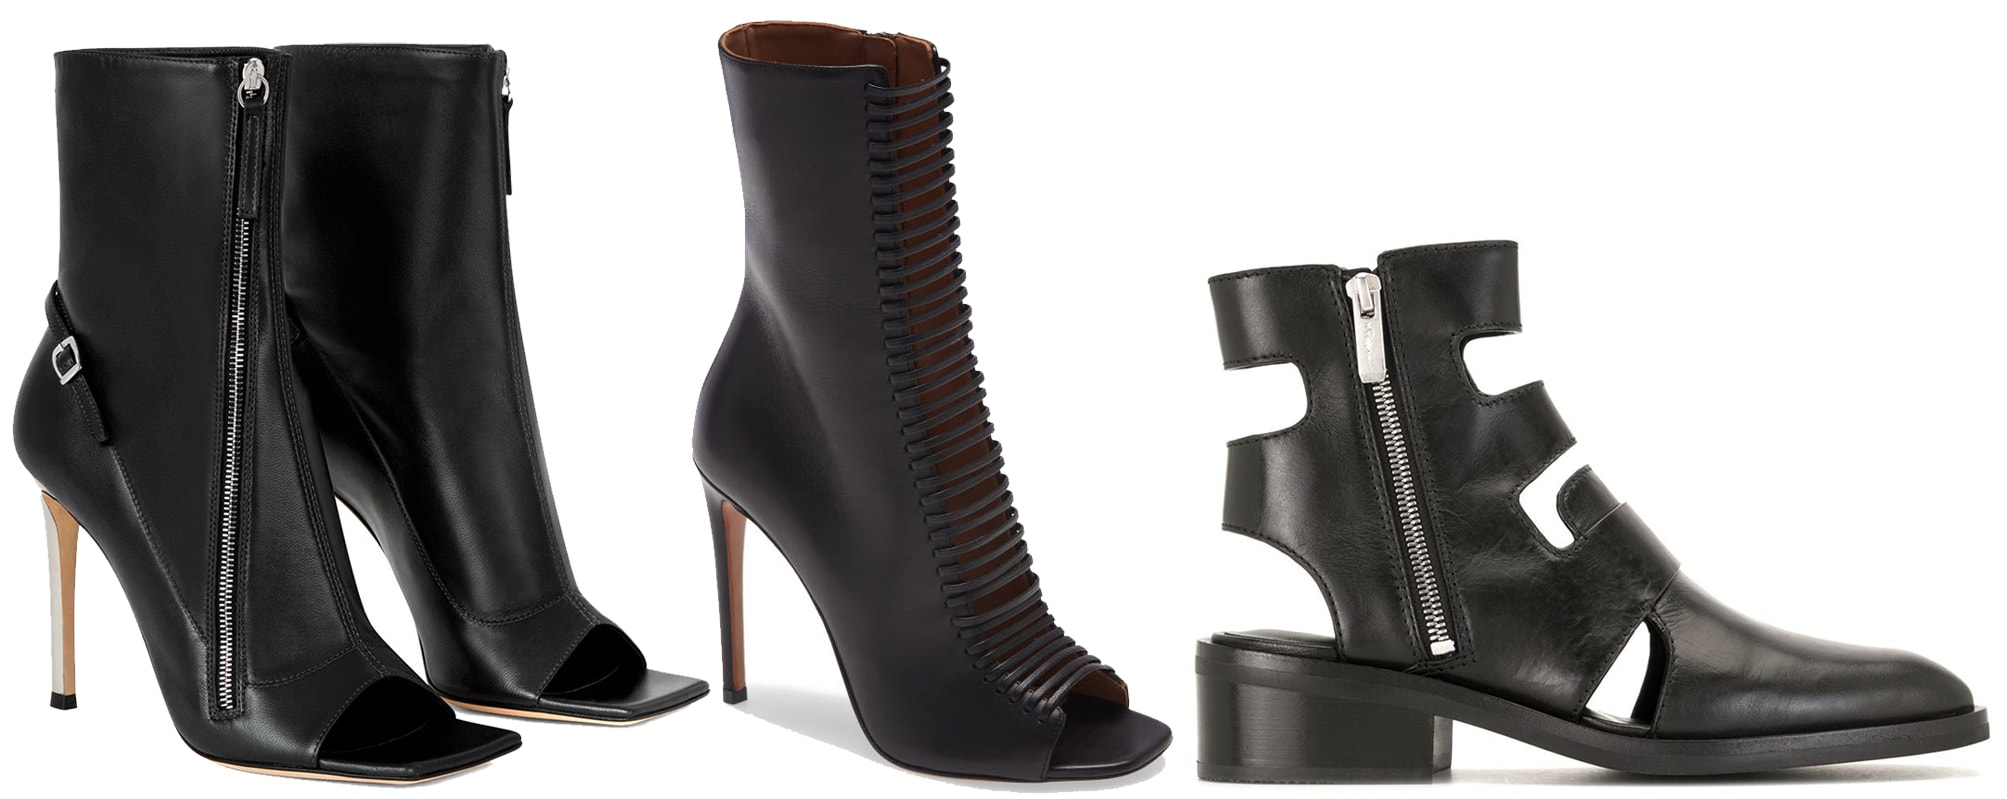 10 Essential Boot Styles Every Woman Needs in Her Closet